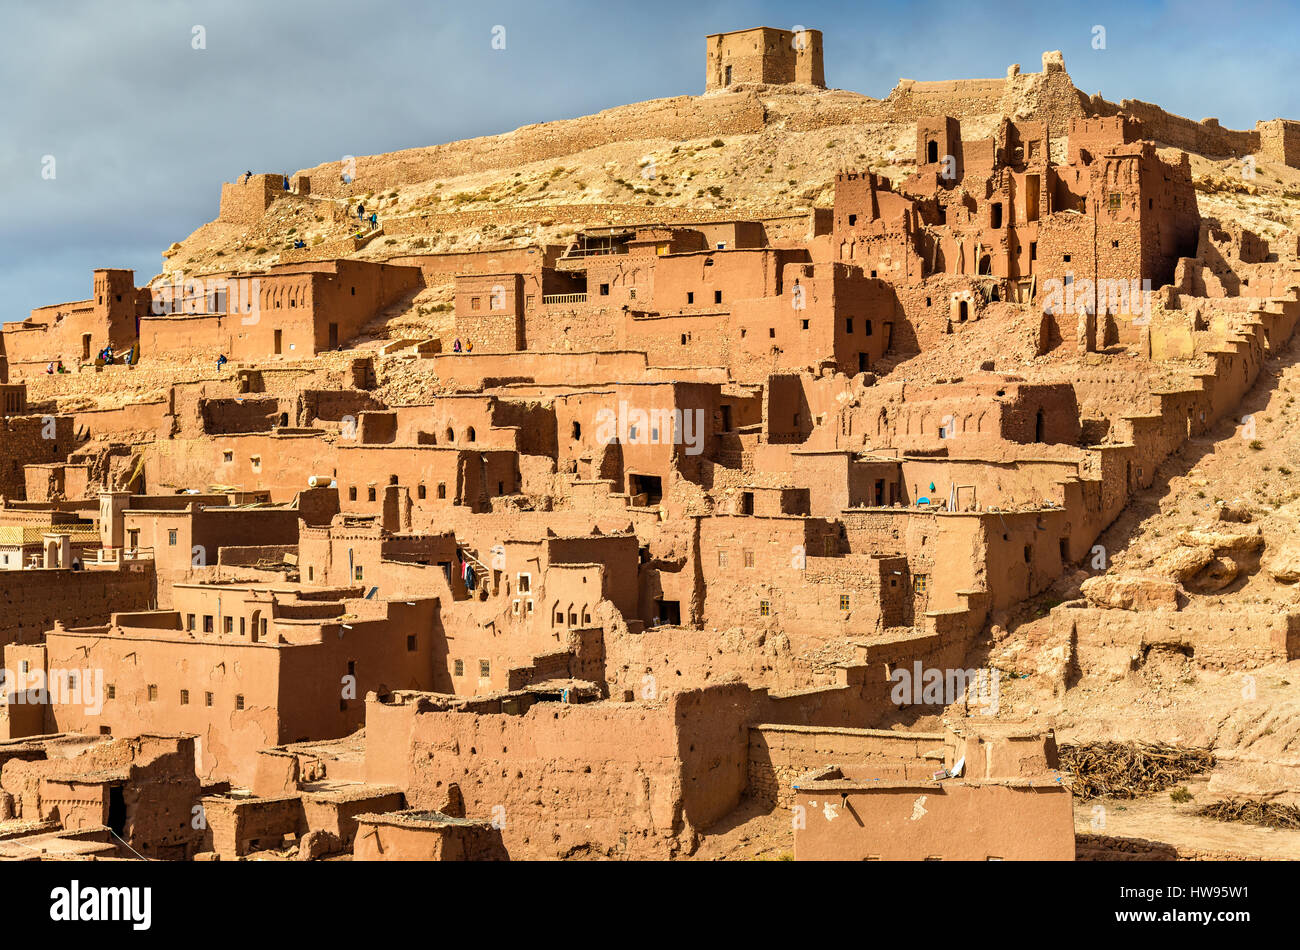 Traditional clay houses in Ait Ben Haddou village, a UNESCO heritage site in Morocco Stock Photo